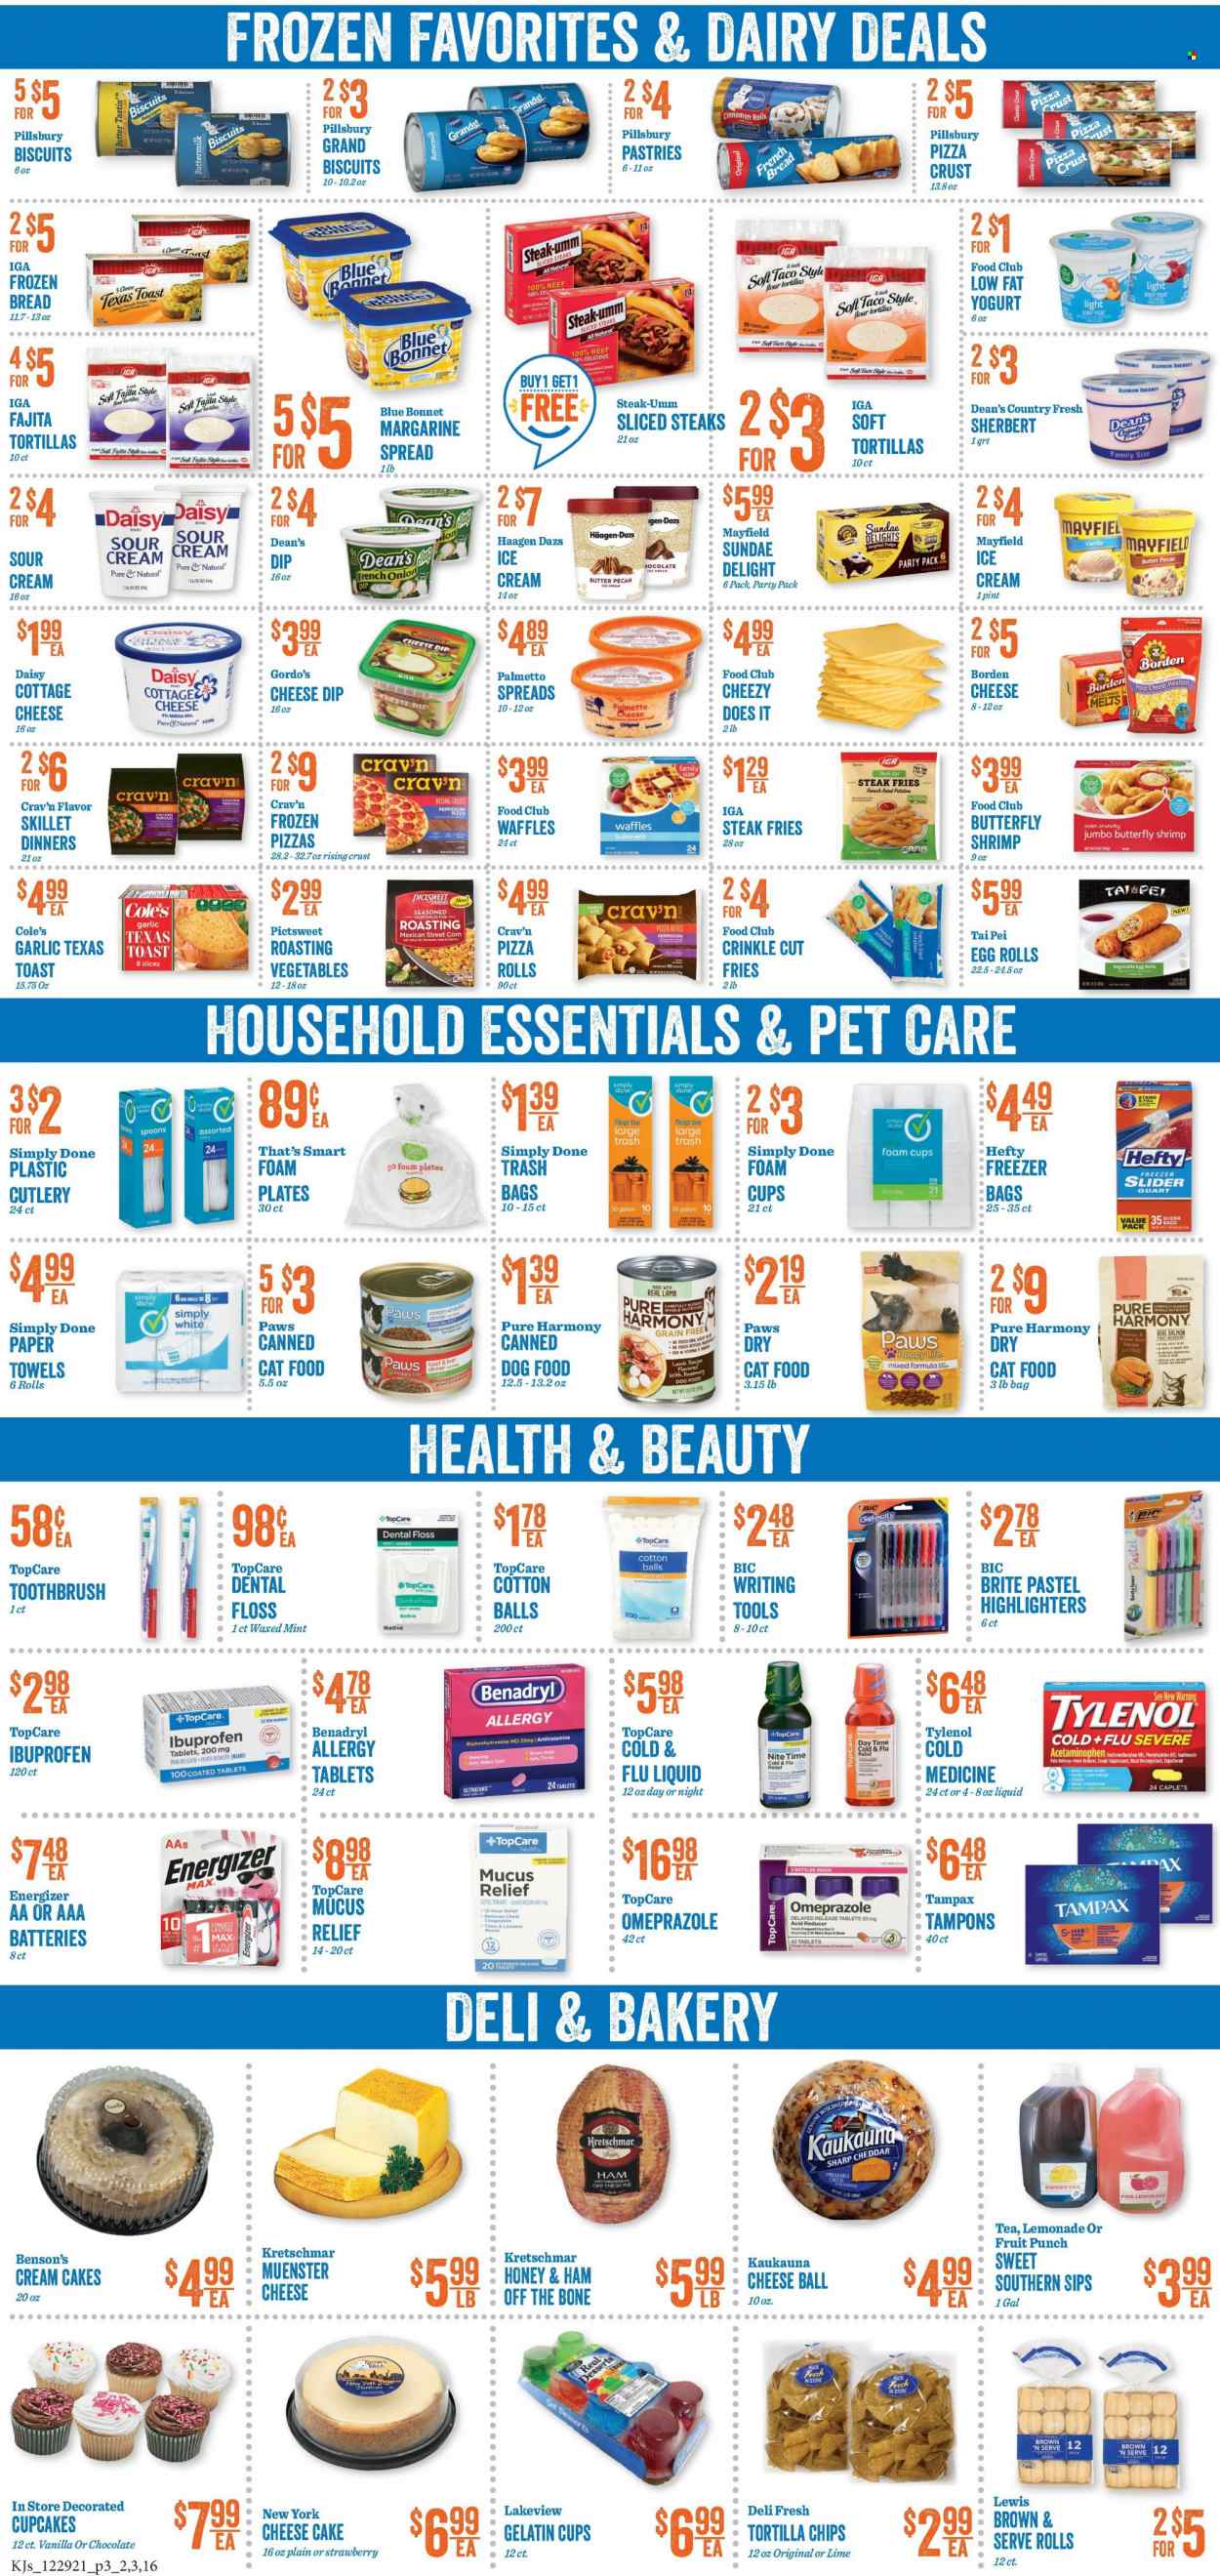 thumbnail - KJ´s Market Flyer - 12/29/2021 - 01/04/2022 - Sales products - bread, cake, pizza rolls, flour tortillas, french bread, cinnamon roll, cupcake, waffles, garlic, shrimps, pizza, egg rolls, Pillsbury, fajita, ham, ham off the bone, pepperoni, cottage cheese, Münster cheese, yoghurt, buttermilk, margarine, sour cream, Häagen-Dazs, potato fries, biscuit, tortilla chips, brown rice, rosemary, honey, lemonade, fruit punch, tea, Sol, cotton balls, kitchen towels, paper towels, toothbrush, Tampax, tampons, Brite, BIC, Hefty, trash bags, spoon, plate, cup, freezer bag, foam plates, foam cup, Energizer, AAA batteries, Paws, animal food, cat food, dog food, Pure Harmony, Cold & Flu, Tylenol, Ibuprofen, gelatin. Page 3.